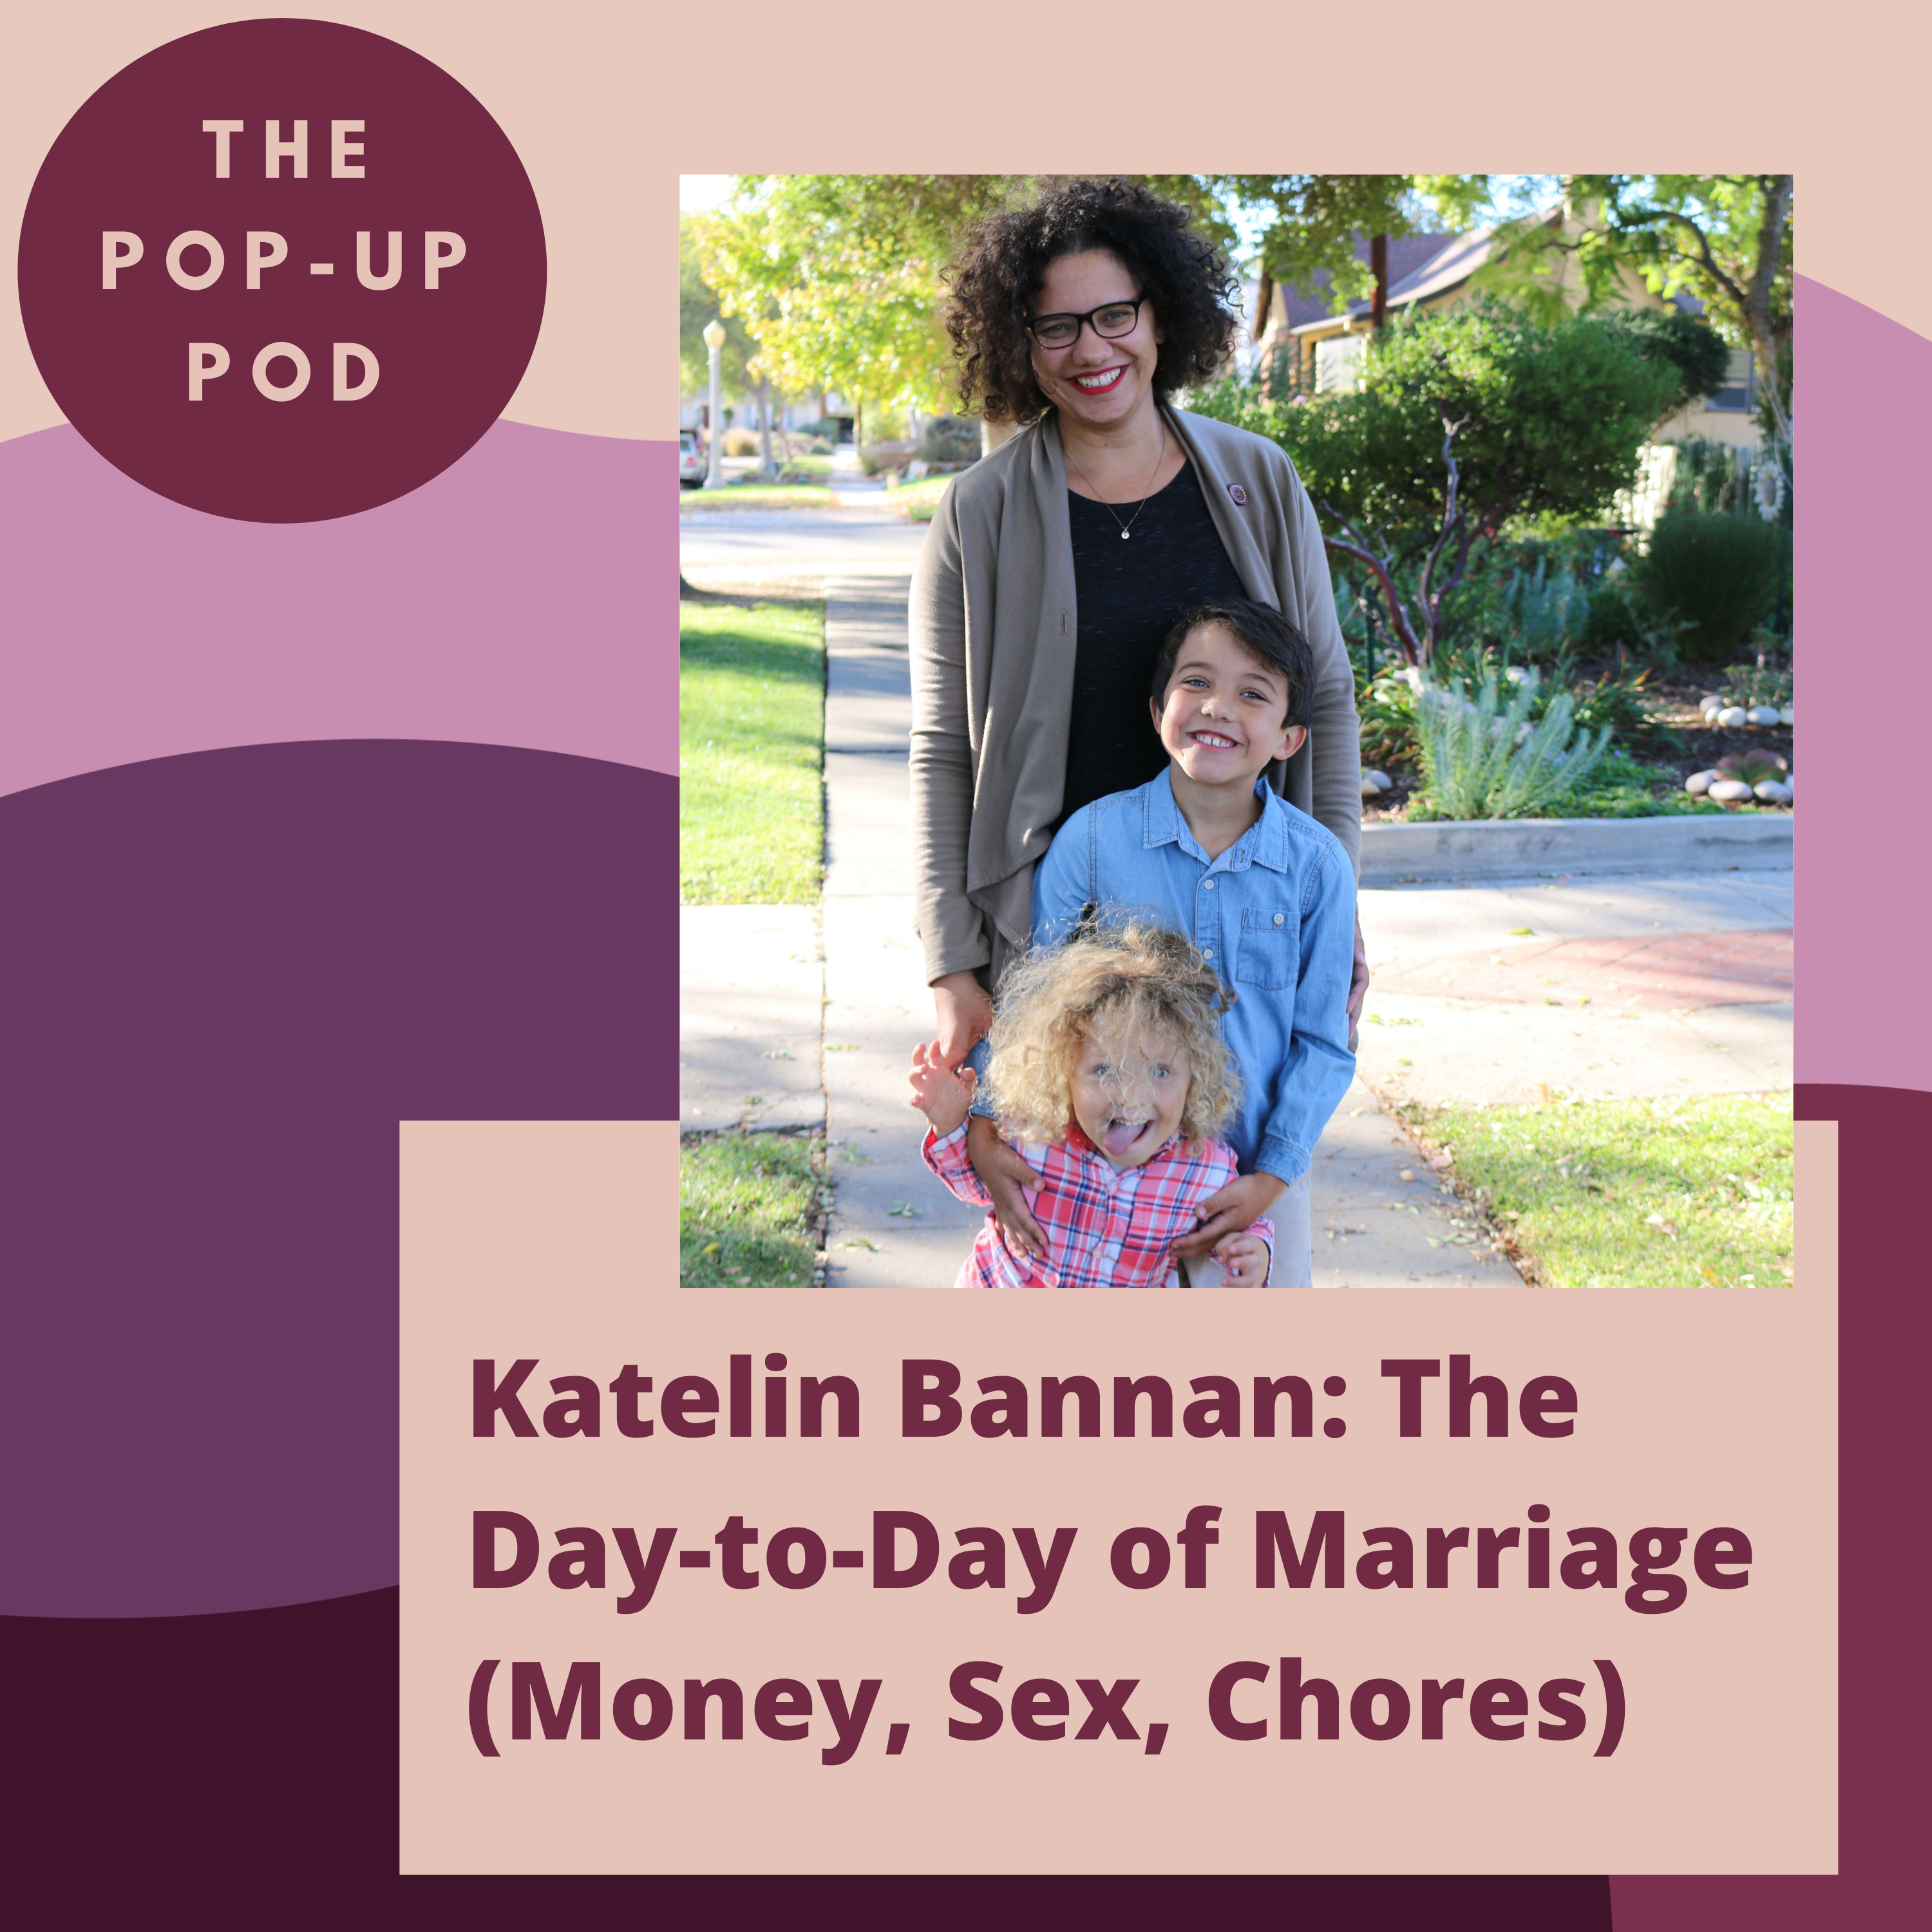 Katelin Bannan: The Day-to-Day of Marriage (Money, Sex, Chores)